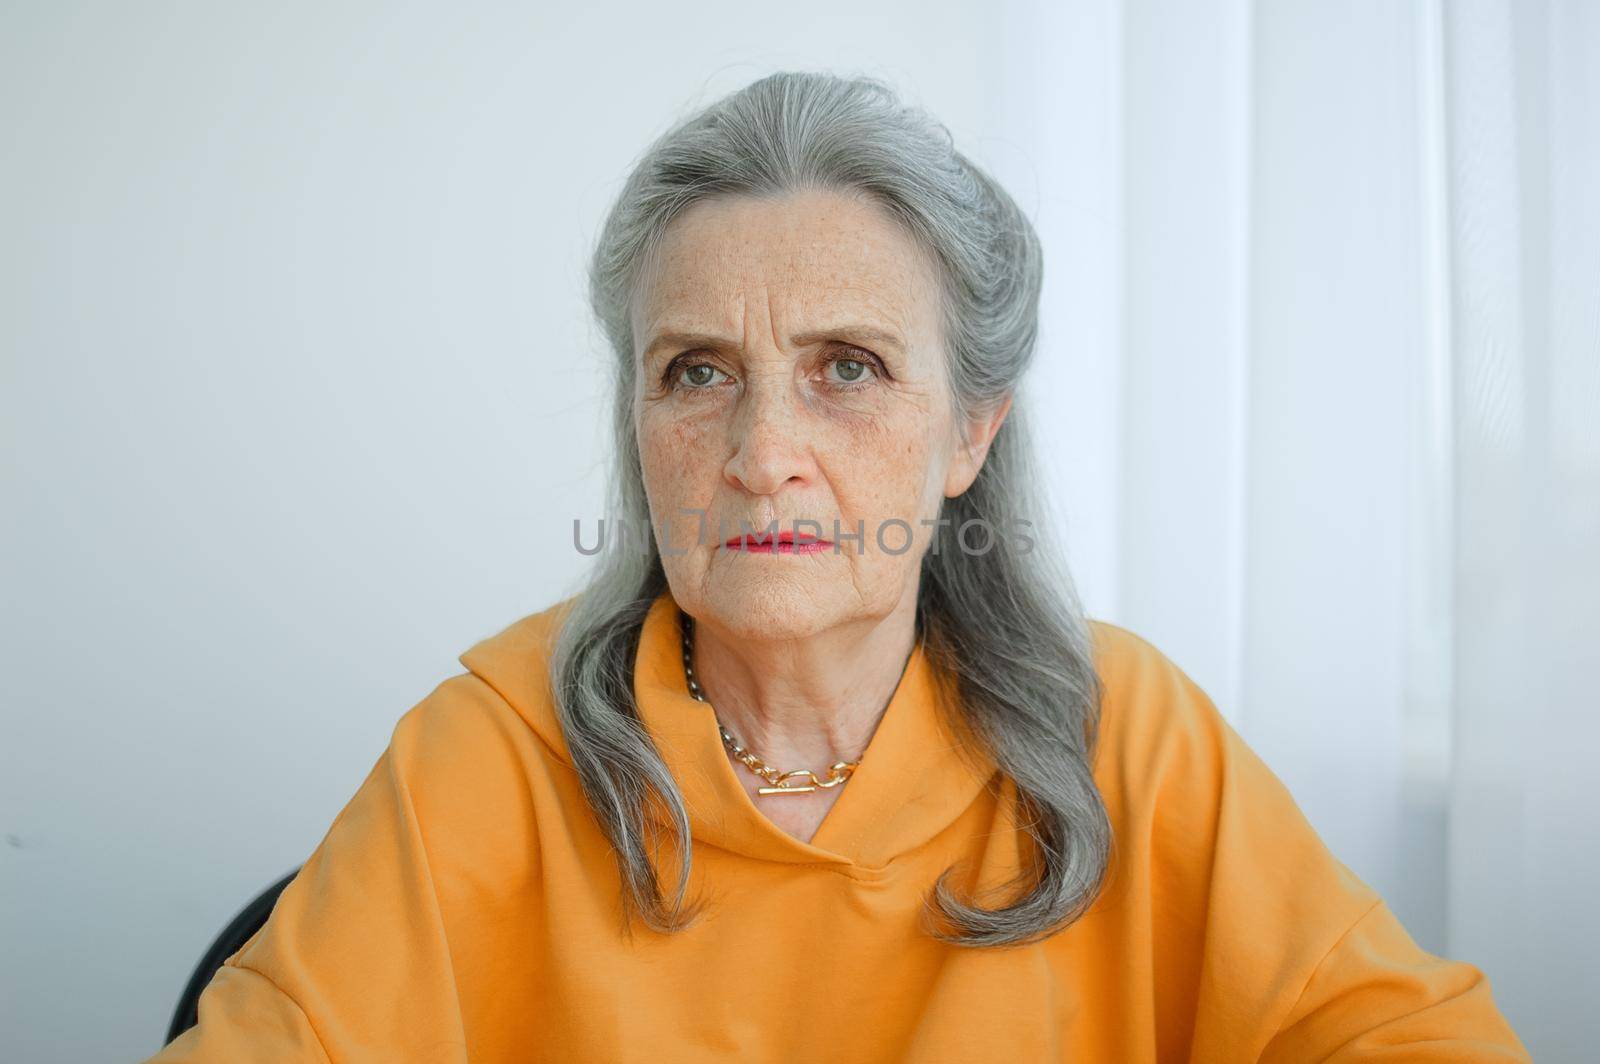 Closeup portrait of angry upset senior mature woman talking with someone and looking at the camera. Negative emotion, facial expression, scandal.